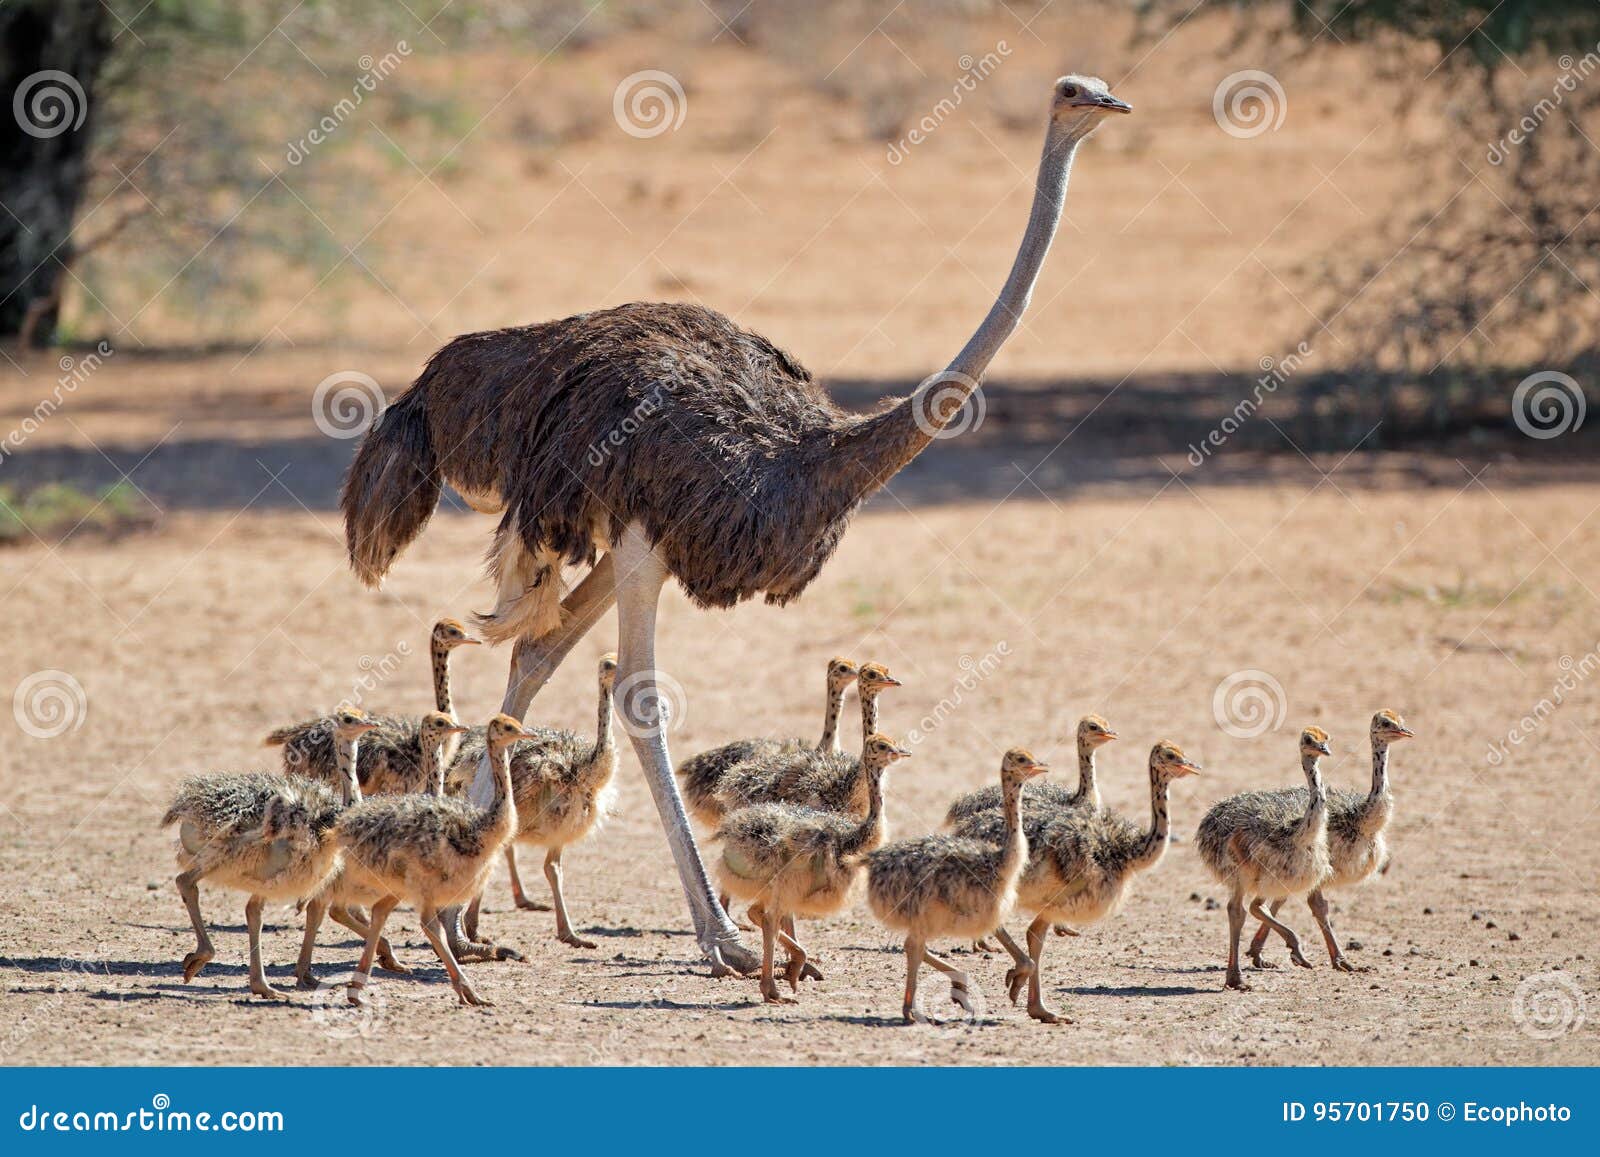 ostrich with chicks